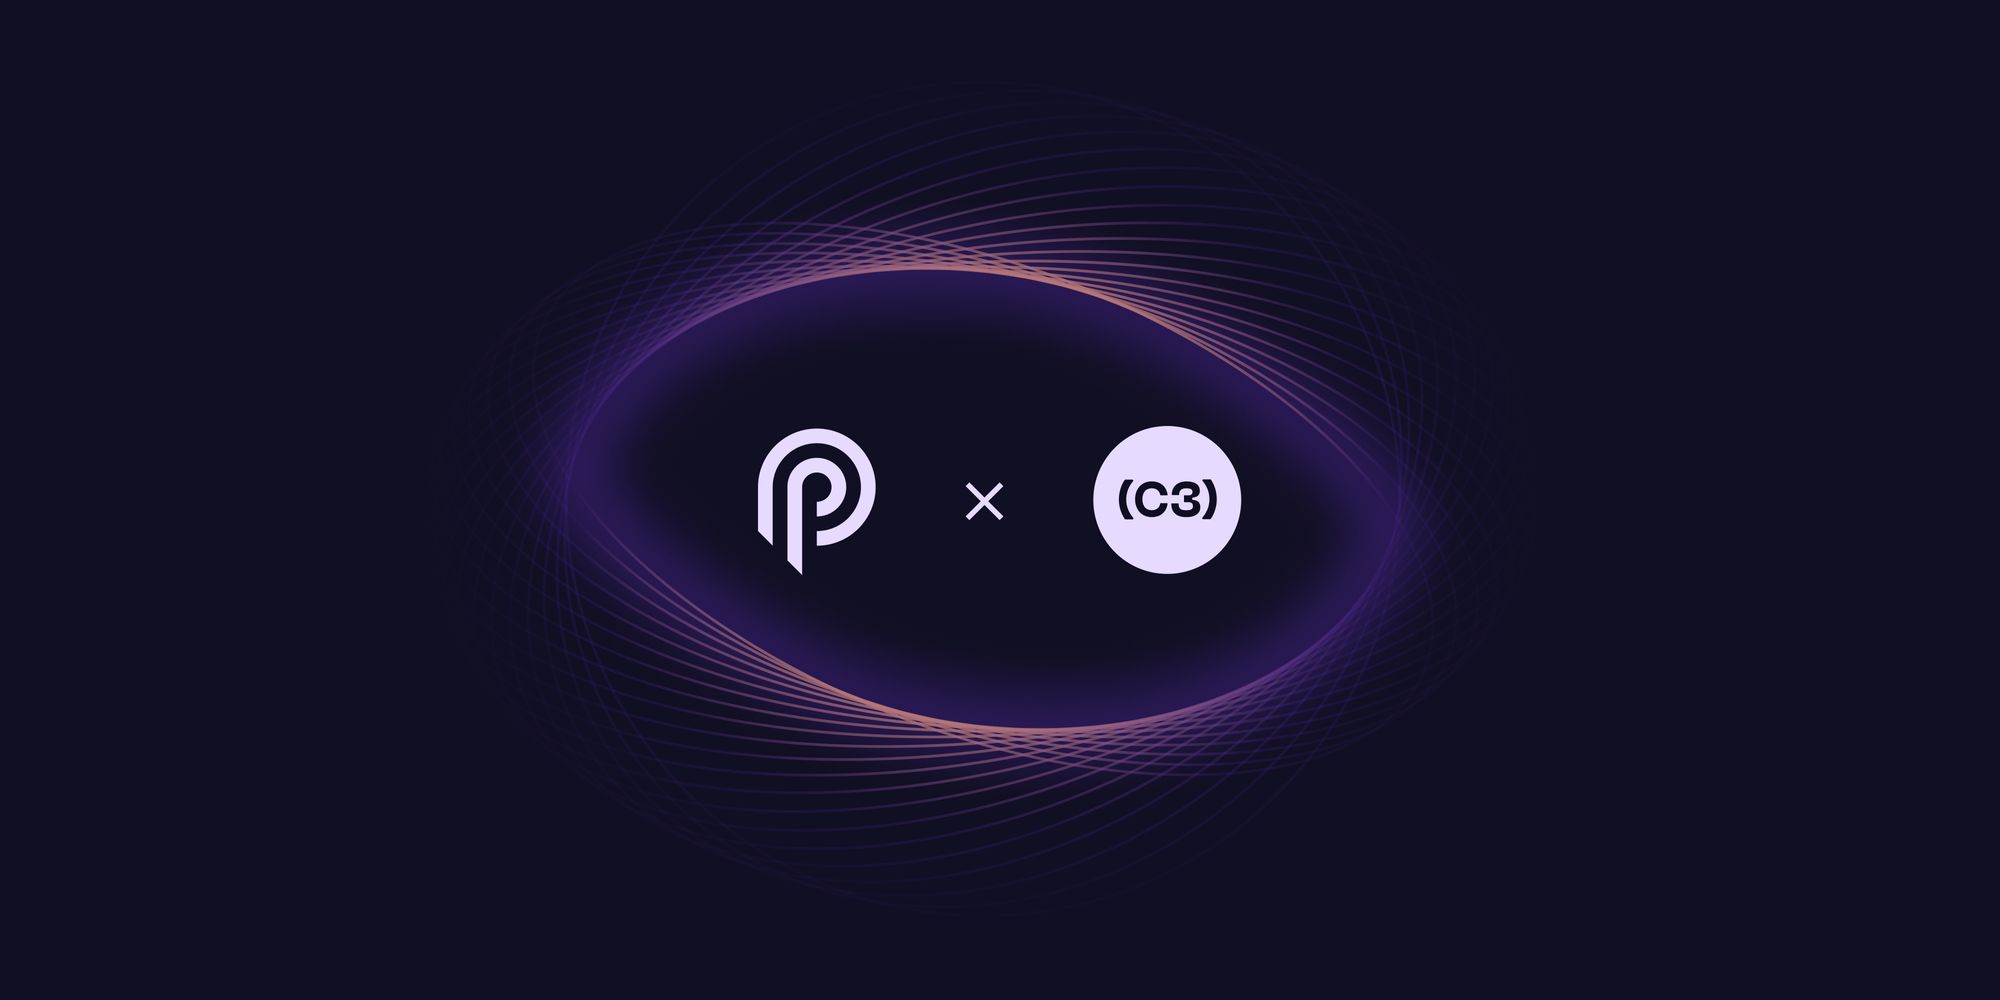 A New Milestone in Price Updates with C3.io’s Successful Testnet | Pyth Case Study